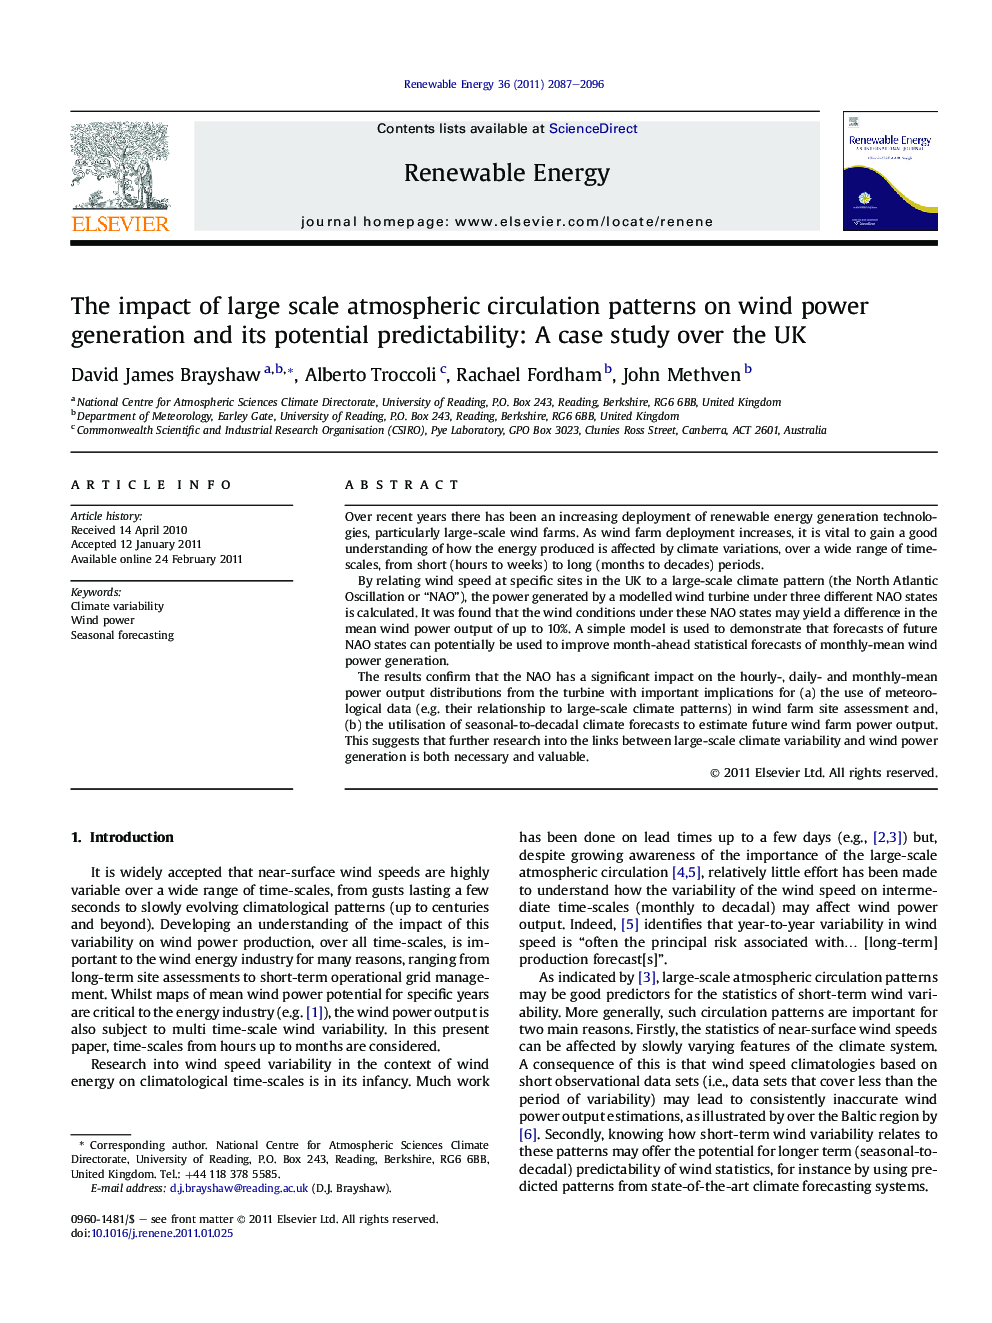 The impact of large scale atmospheric circulation patterns on wind power generation and its potential predictability: A case study over the UK